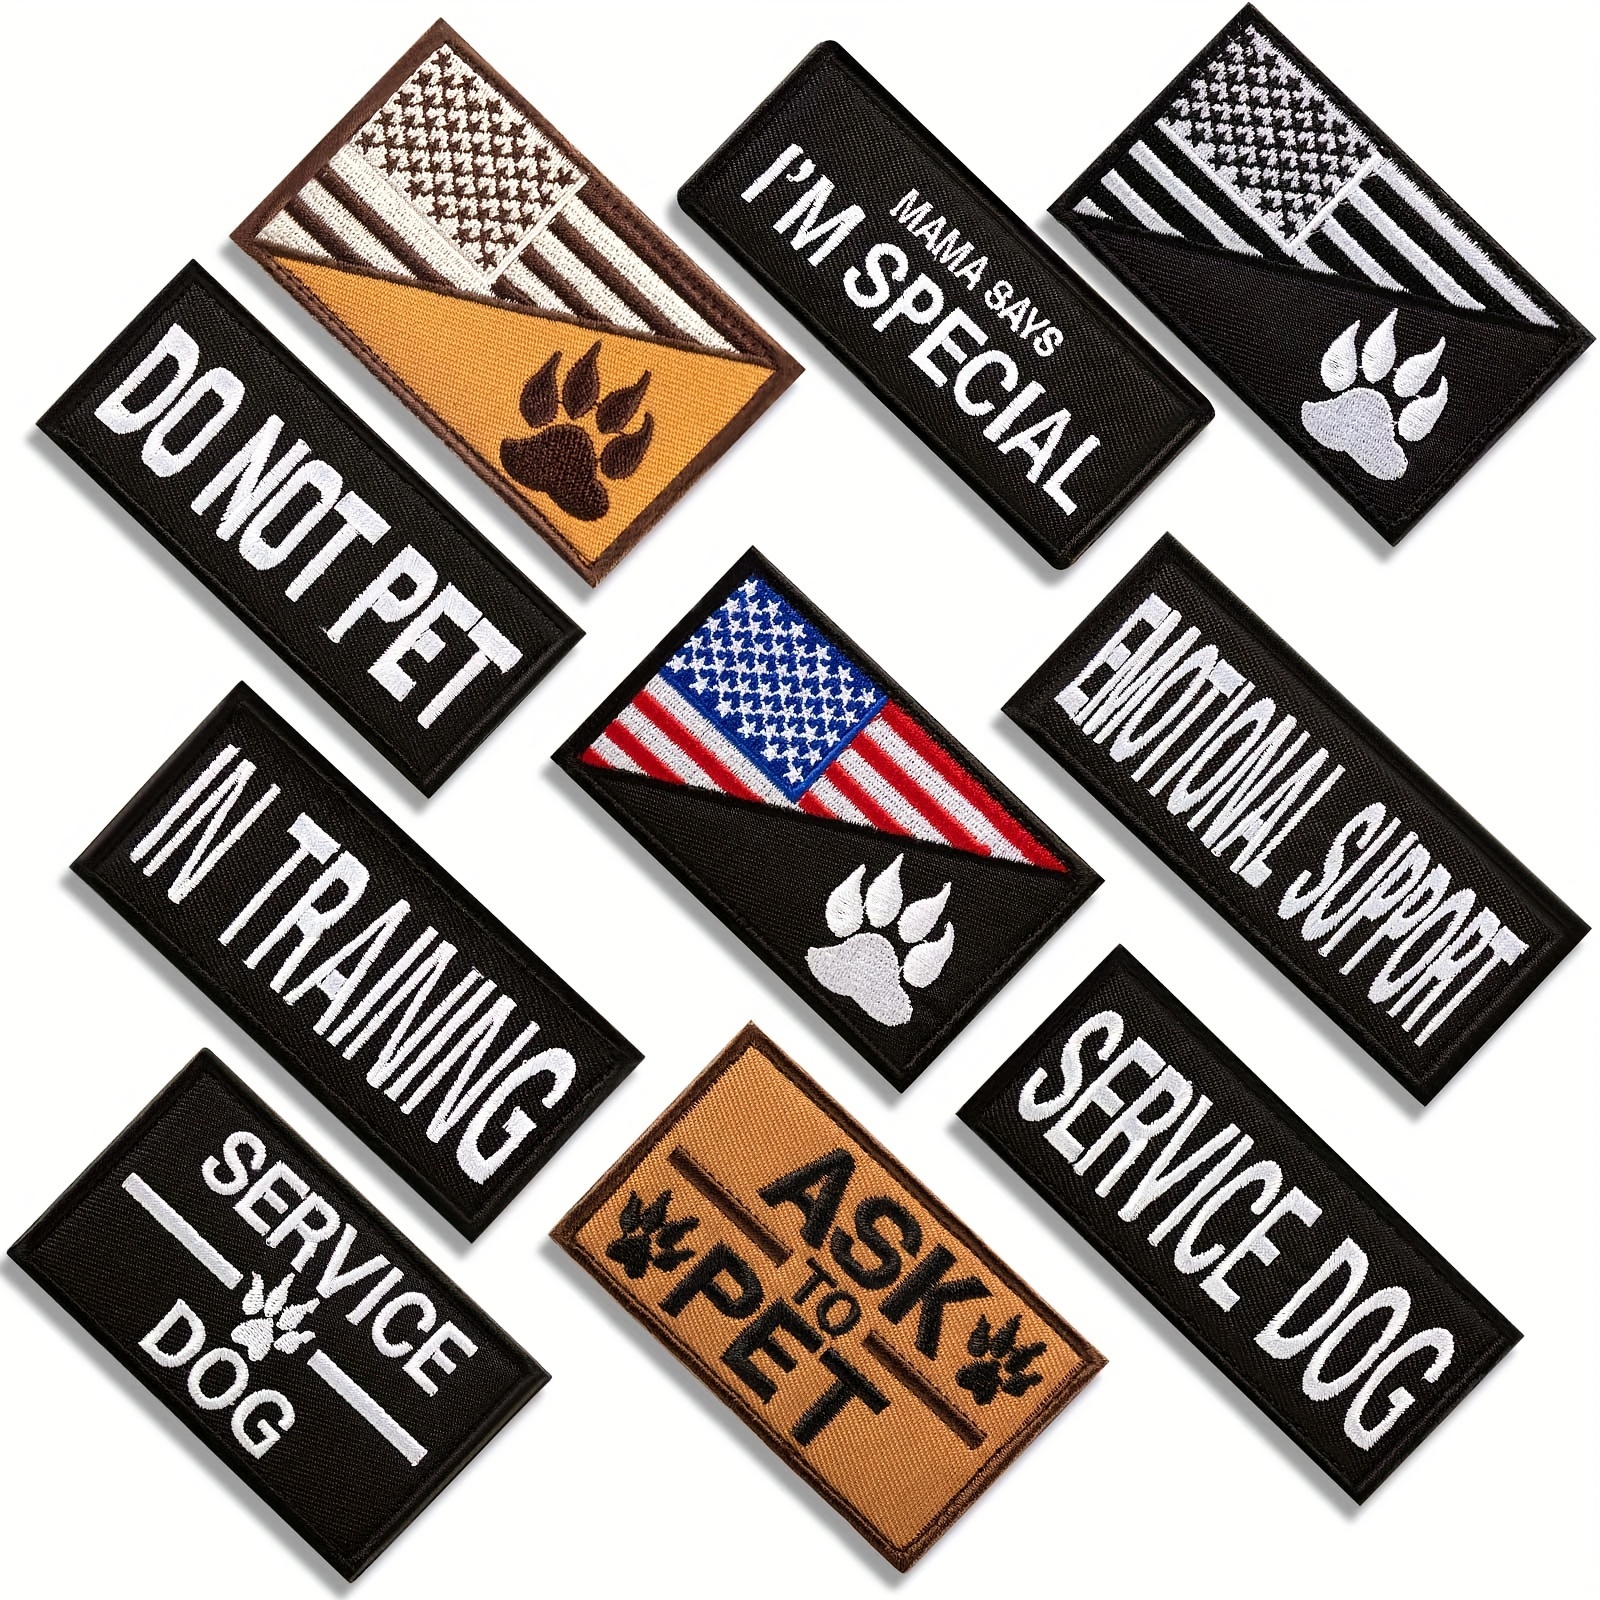  I'm Friendly Please Pet Me Rectangular Service Dog Sew On  Patch for Vest or Harness : Pet Supplies